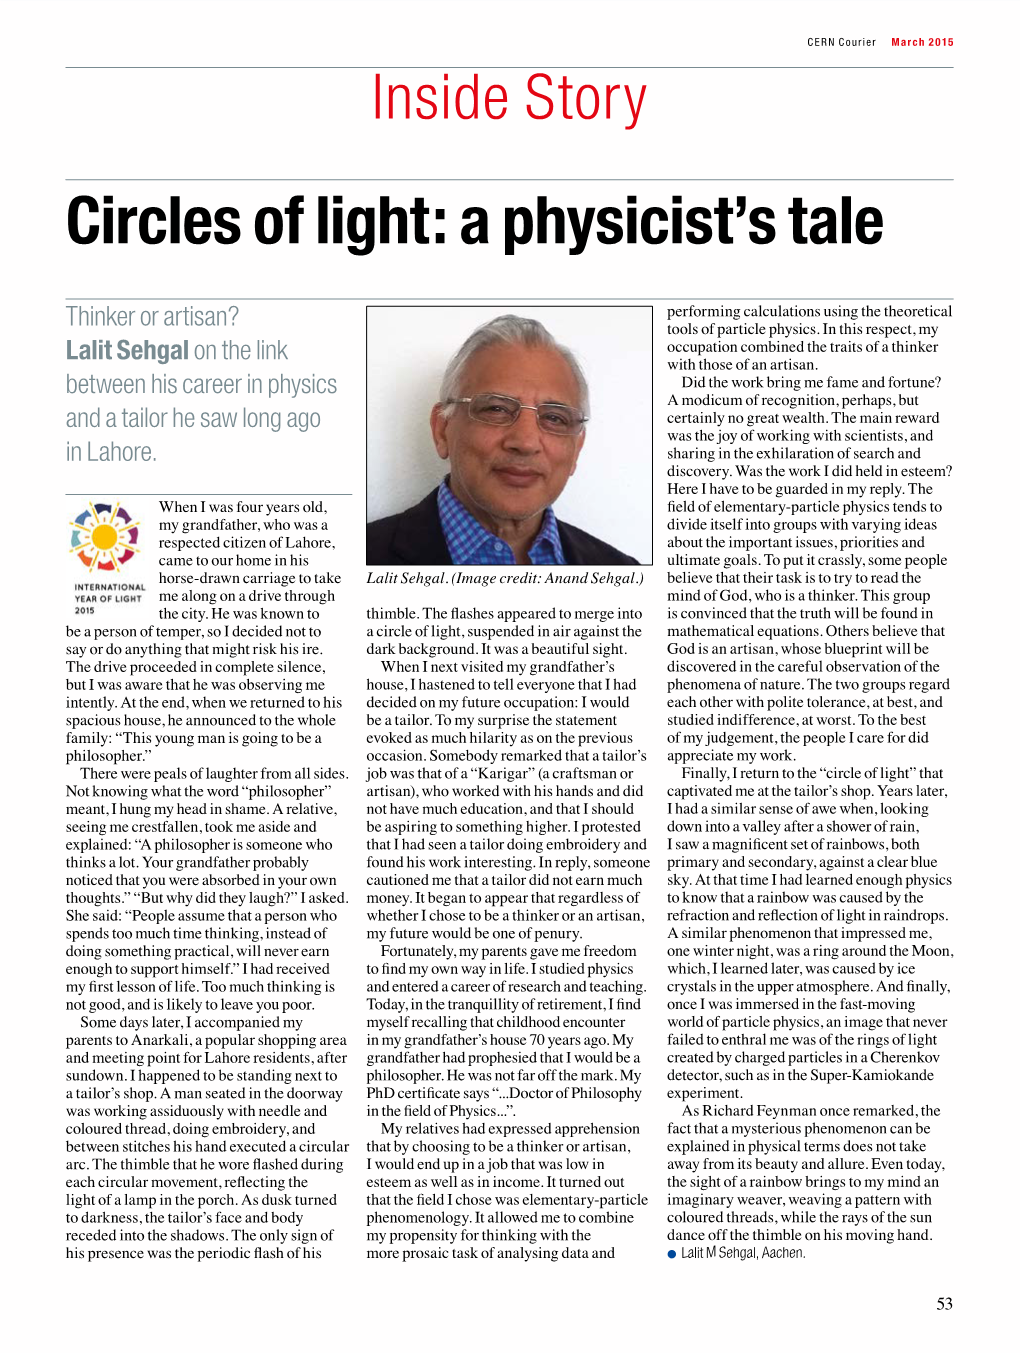 Circles of Light: a Physicist's Tale